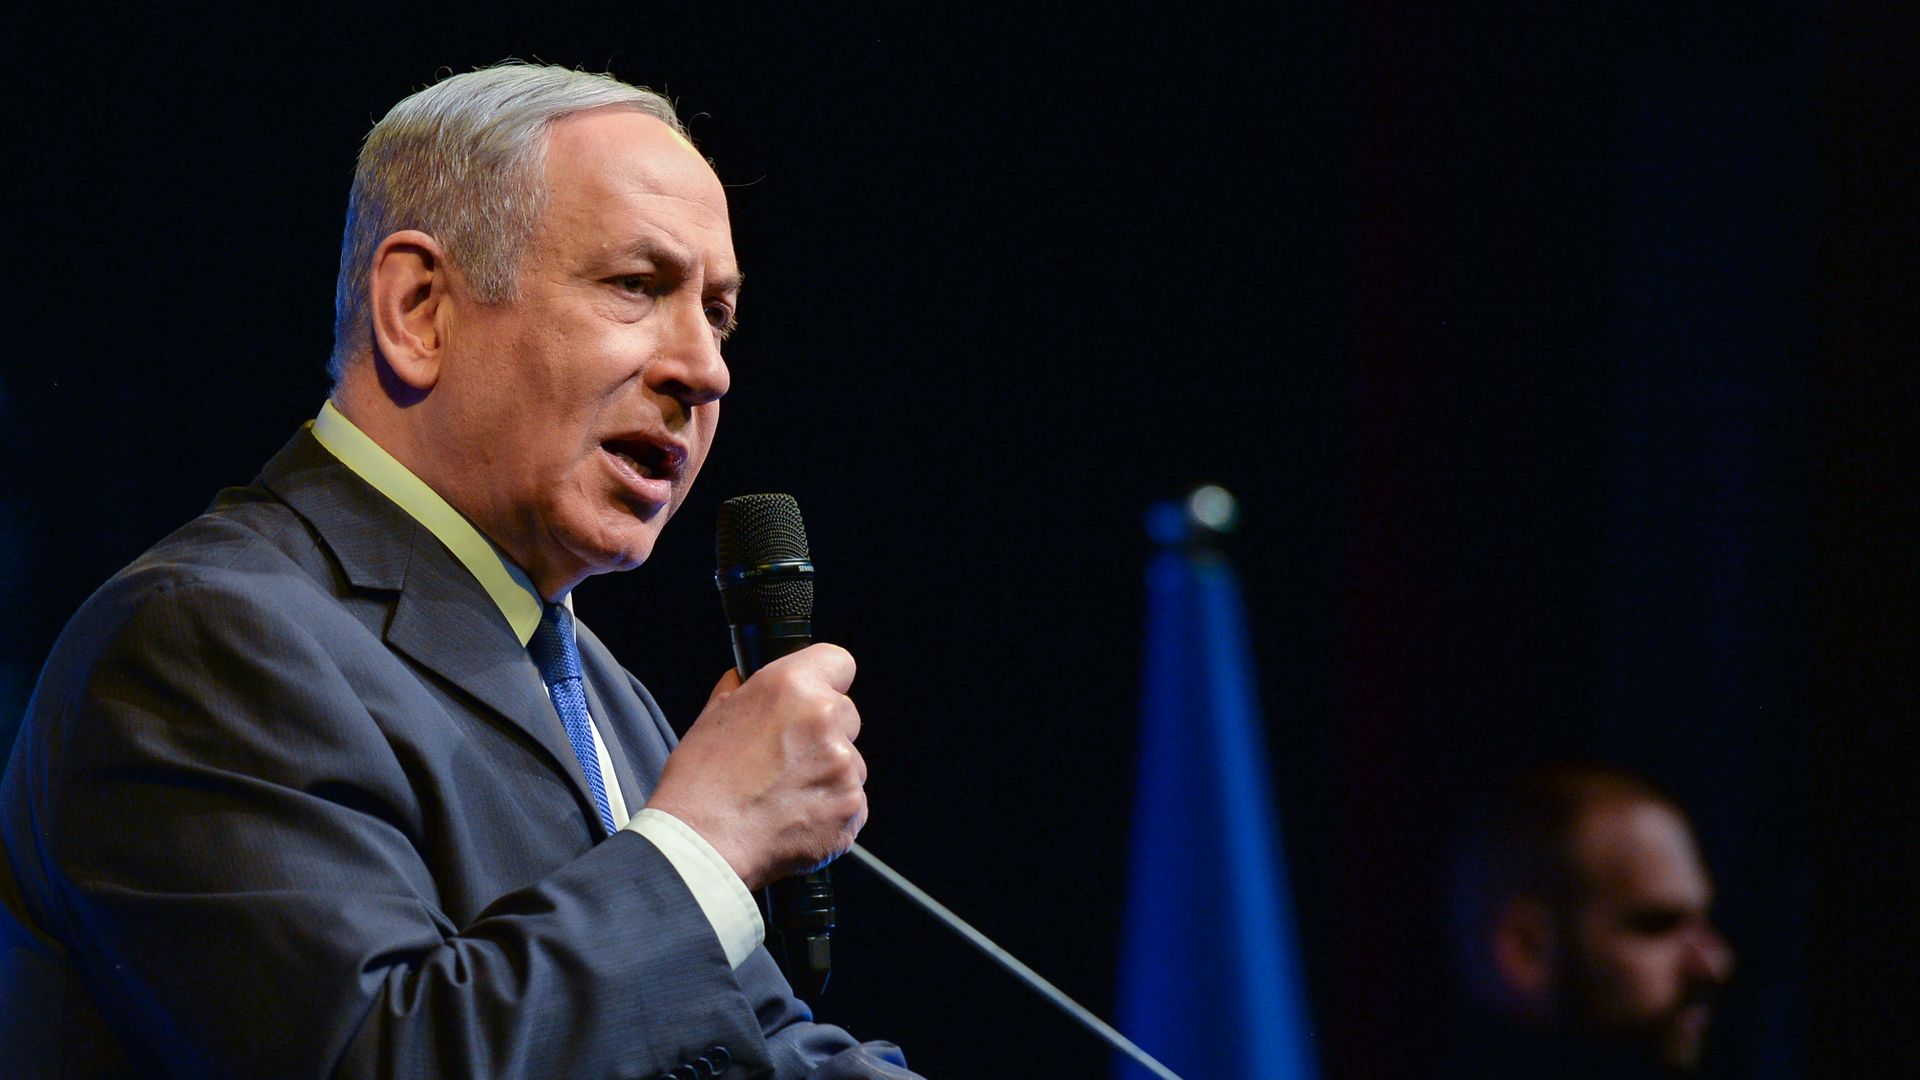 Picture of Israeli Prime Minister Benjamin Netanyahu speaking into a microphone